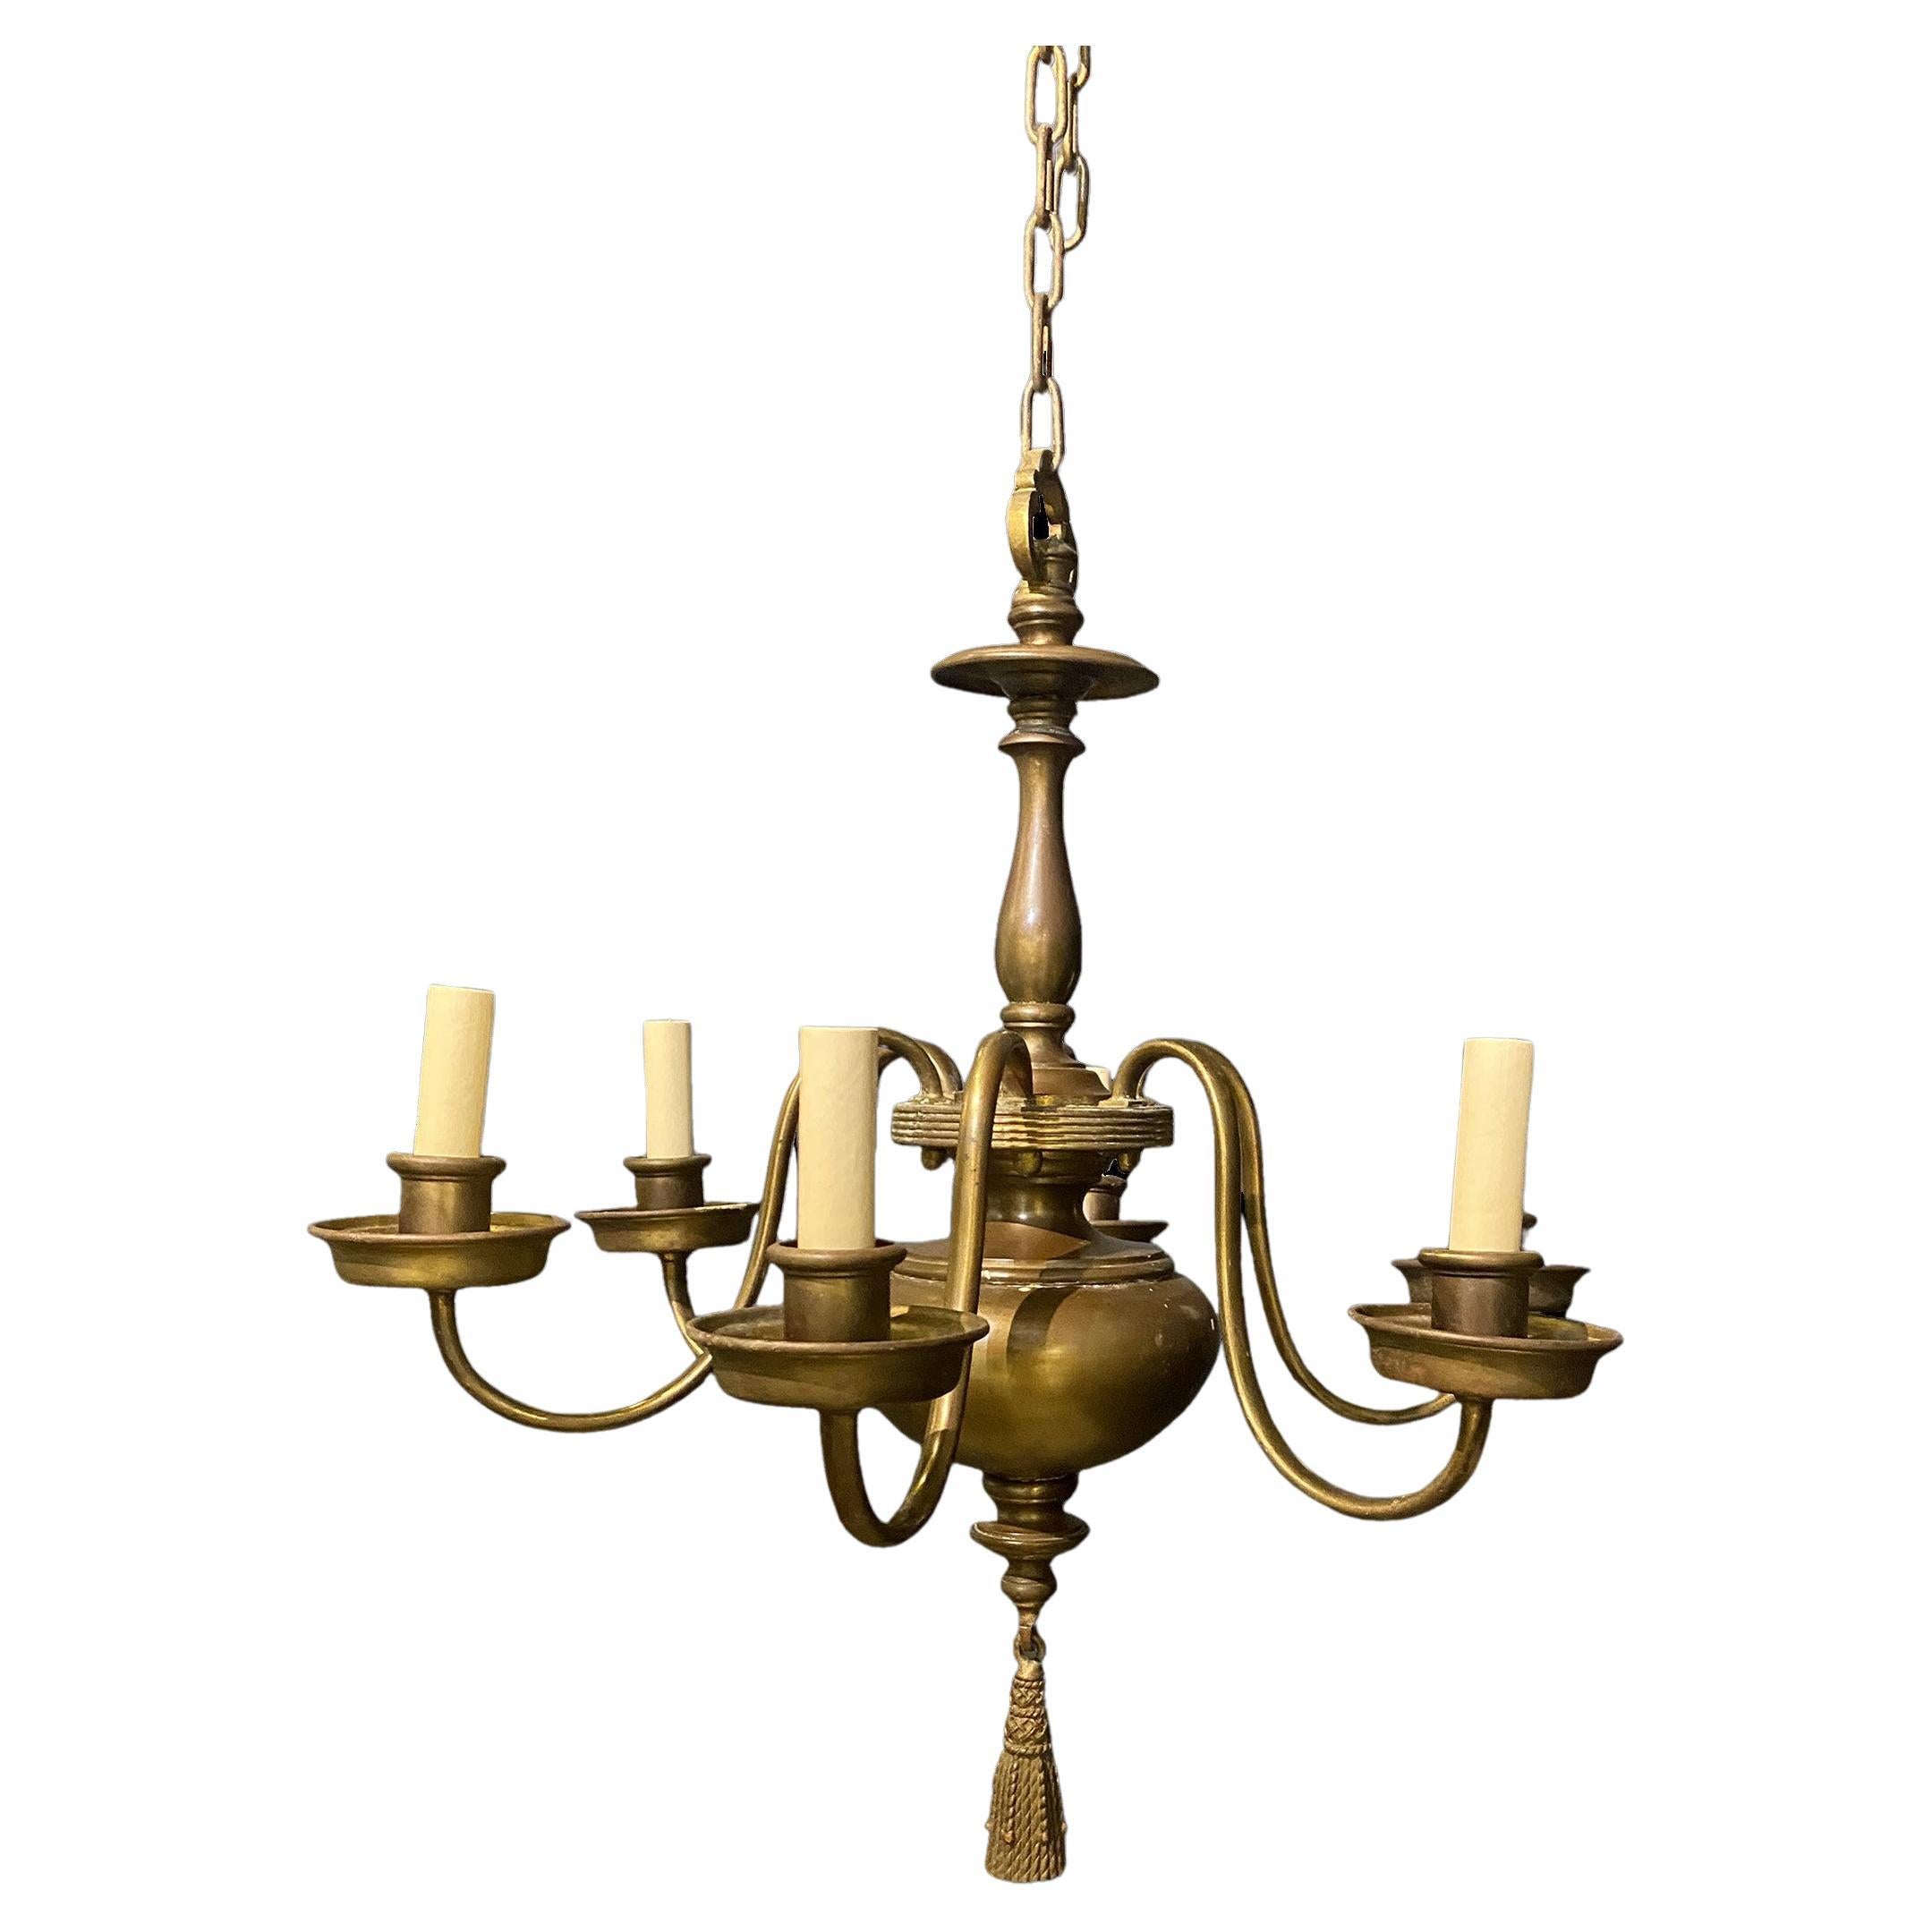 1910's Caldwell Williamsburg Style Bronze Chandelier with 6 Lights